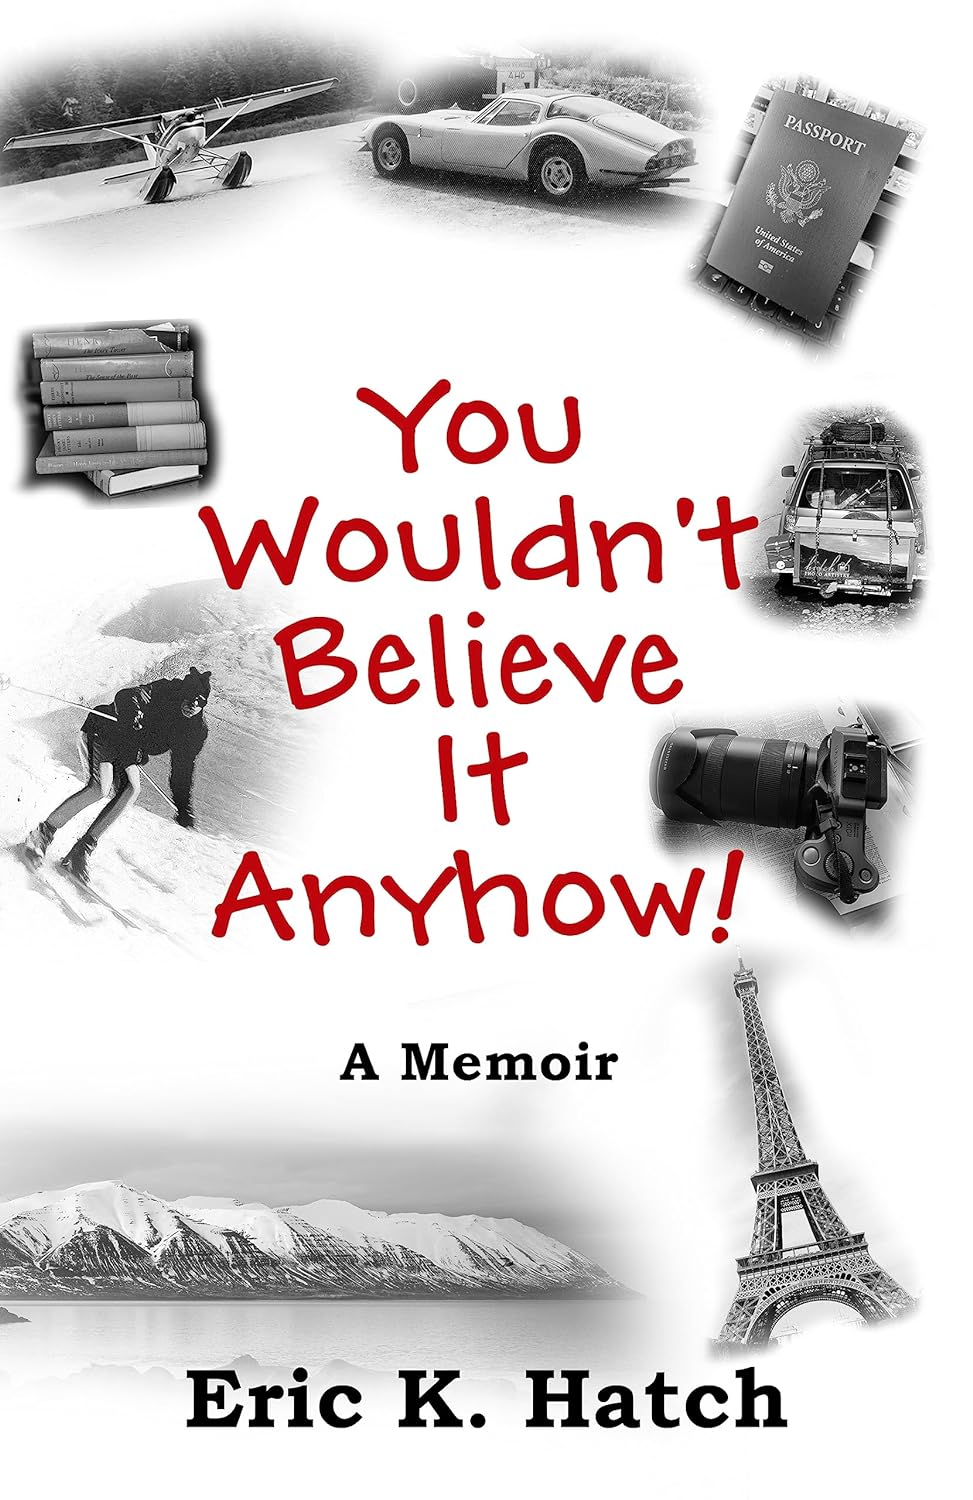 A True Life Story "You Wouldn't Believe It Anyhow: True Adventures From A Non-Standard Life"